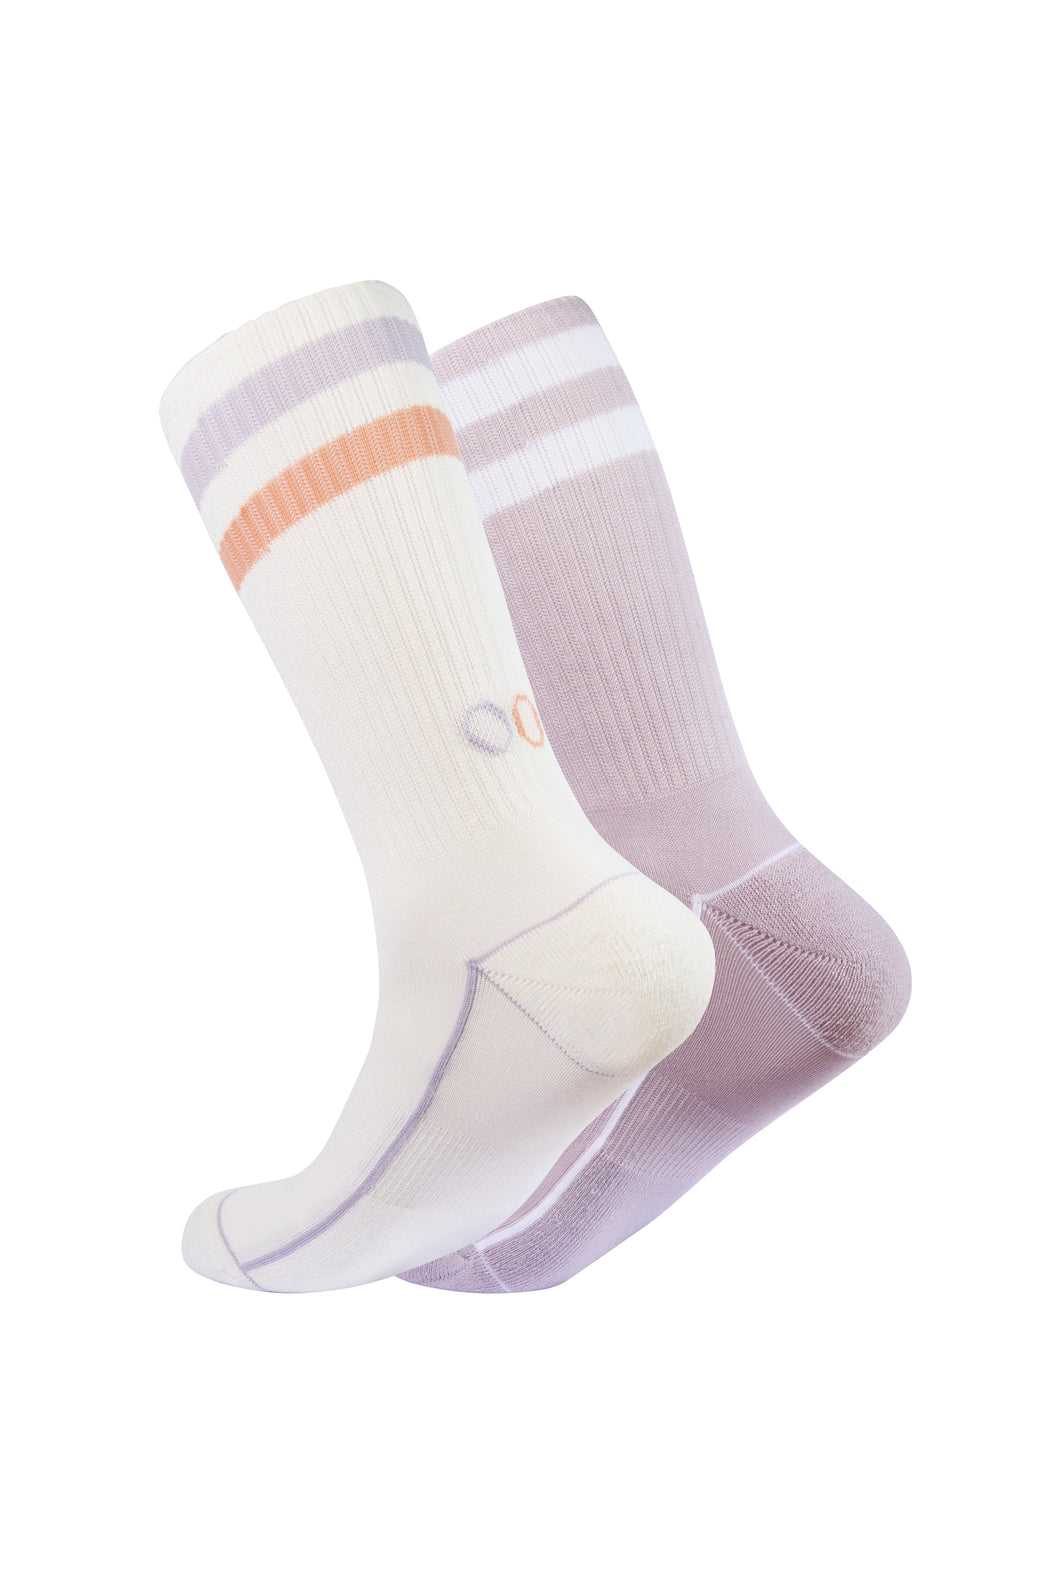 OOLEY Socks Casual 2 Pack Lilac-White